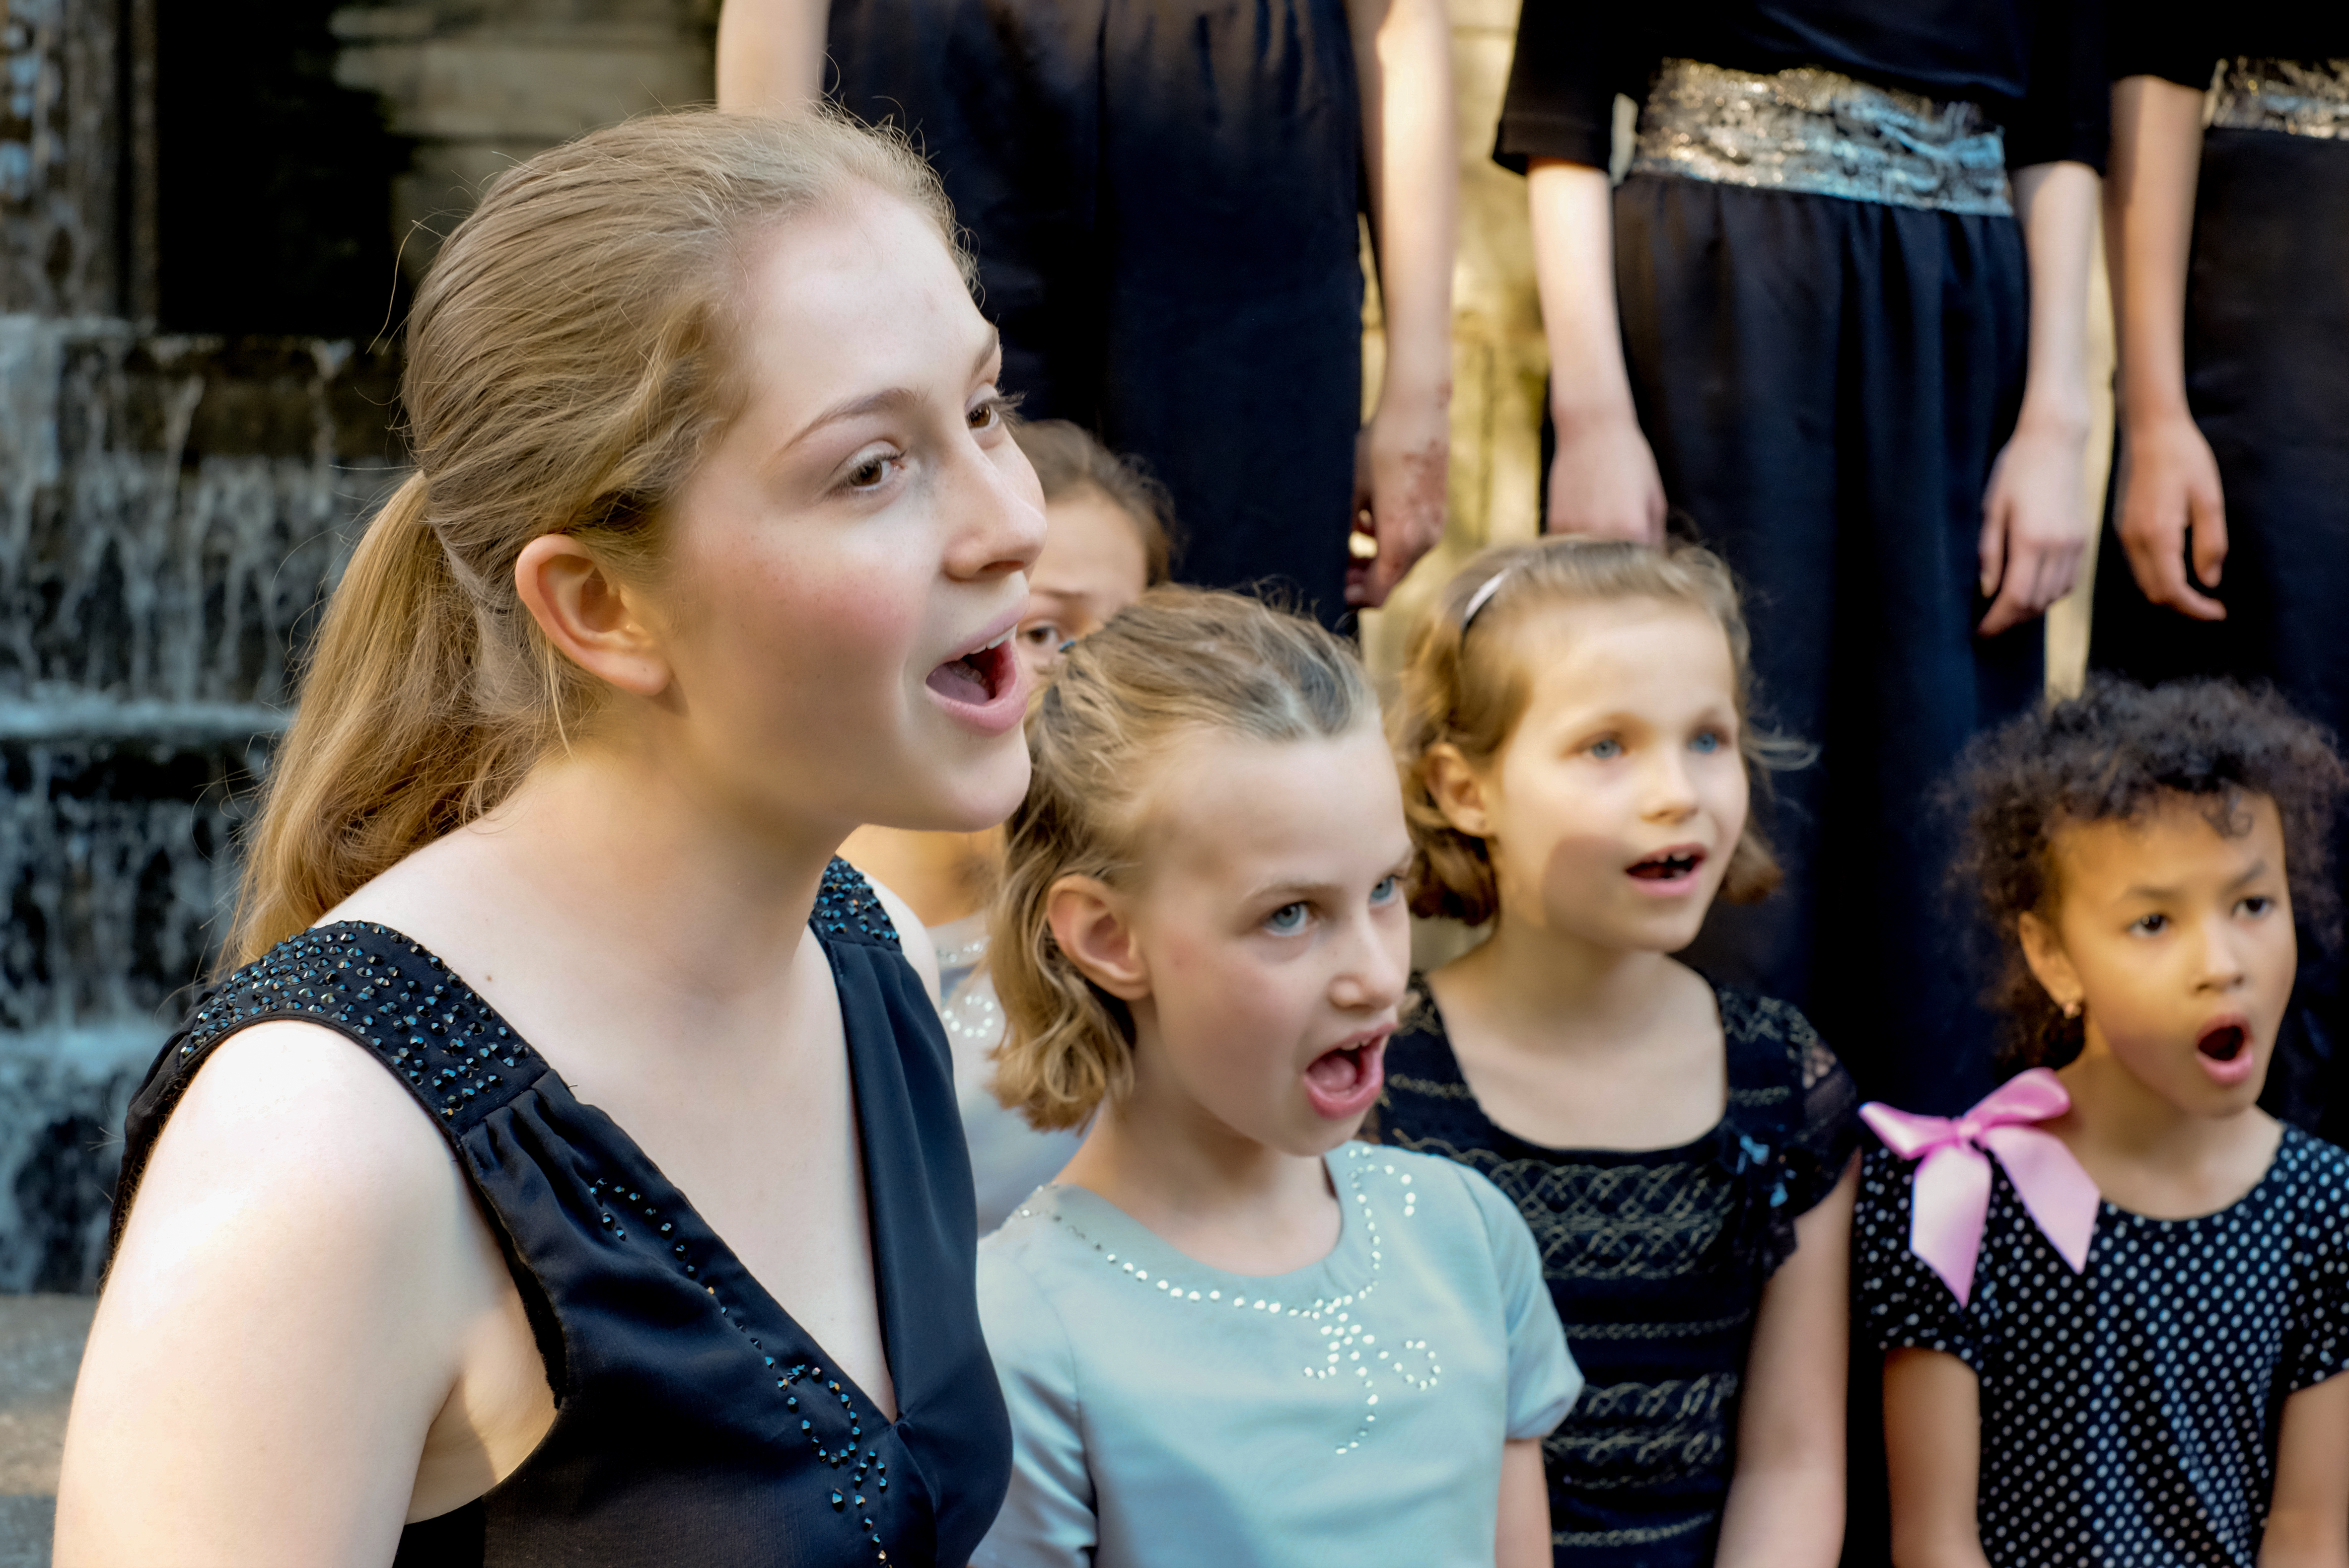 Northwest Girlchoir. Photo credit: Tricia Enfield Photography